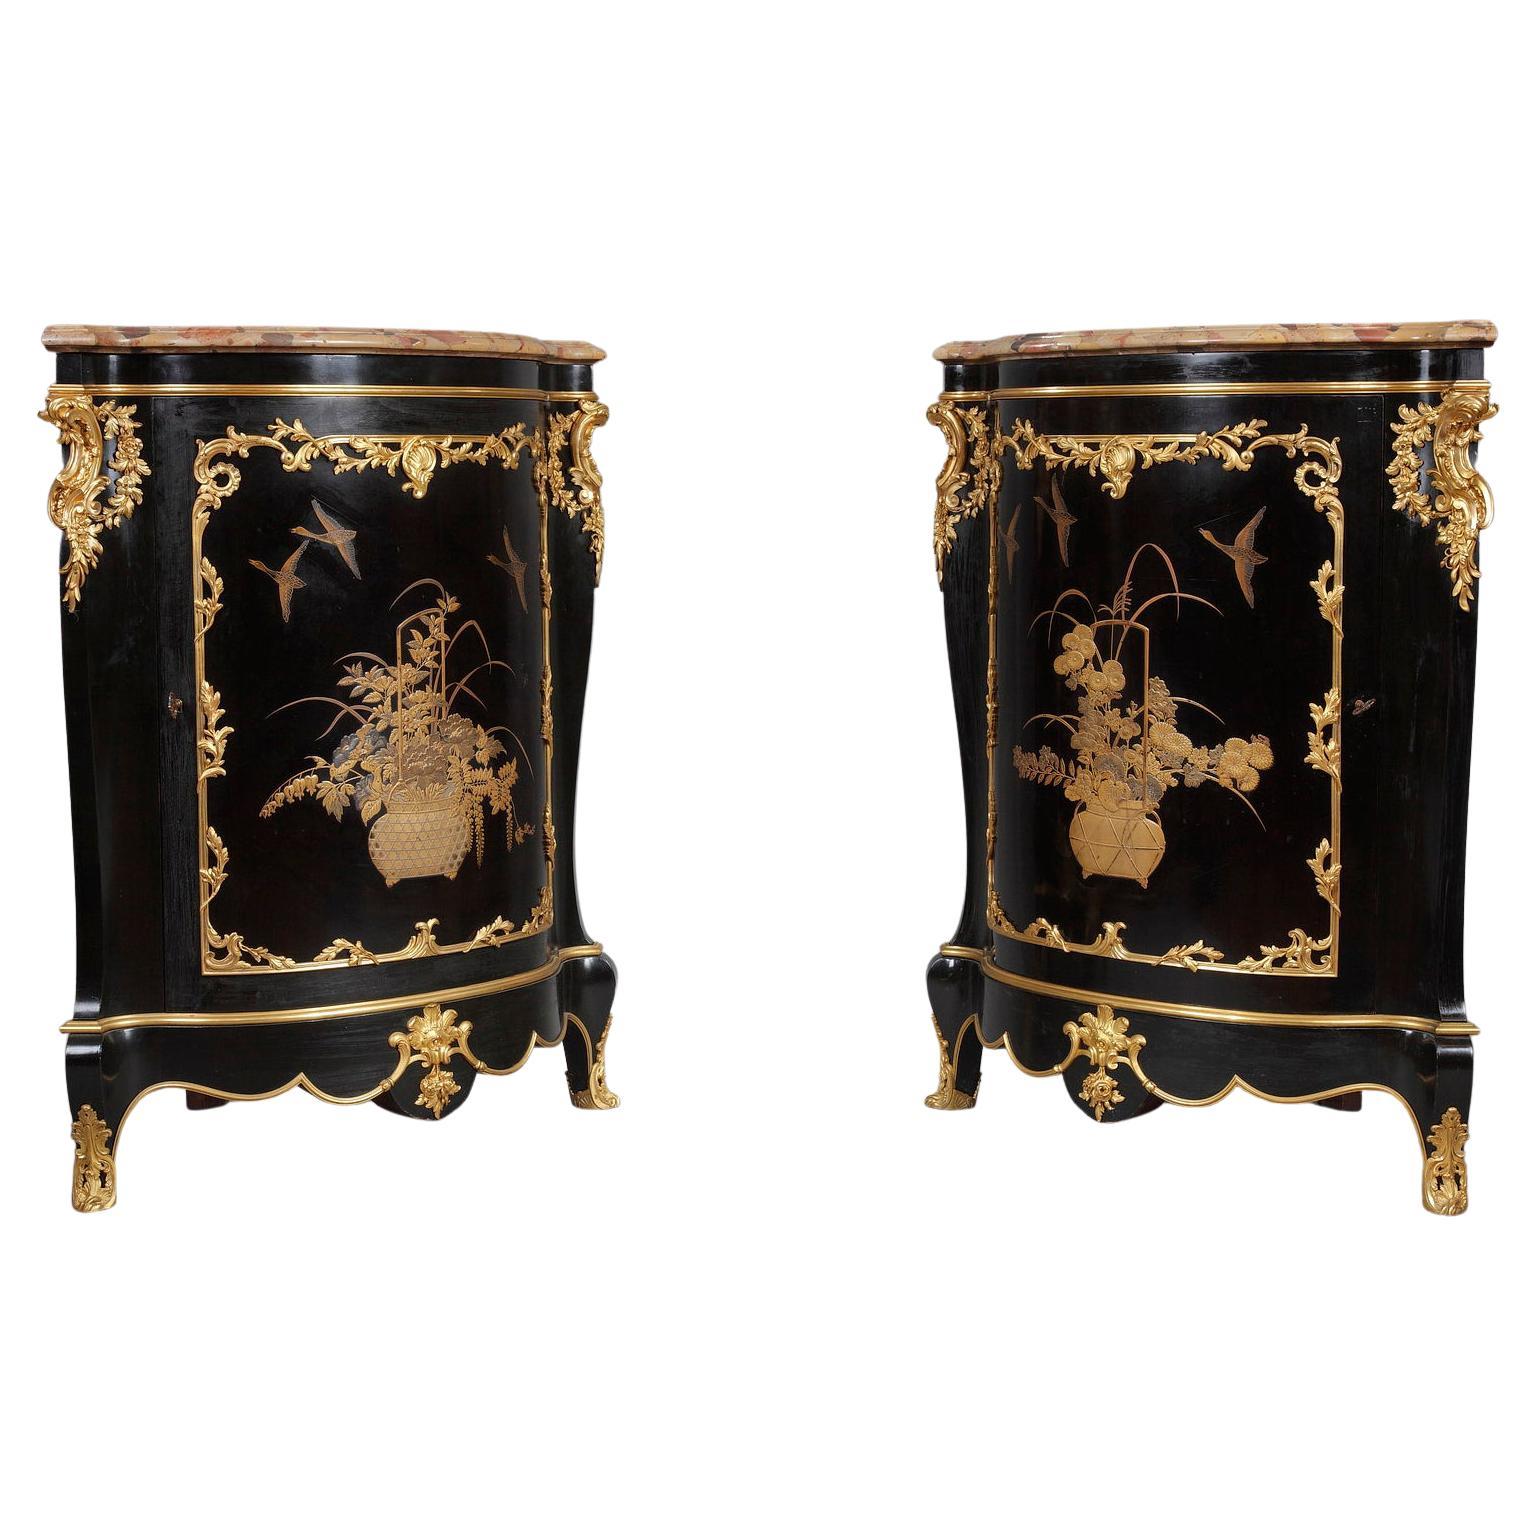 Pair of Lacquered Wood Encoignures, by A.E. Beurdeley, France, Circa 1890